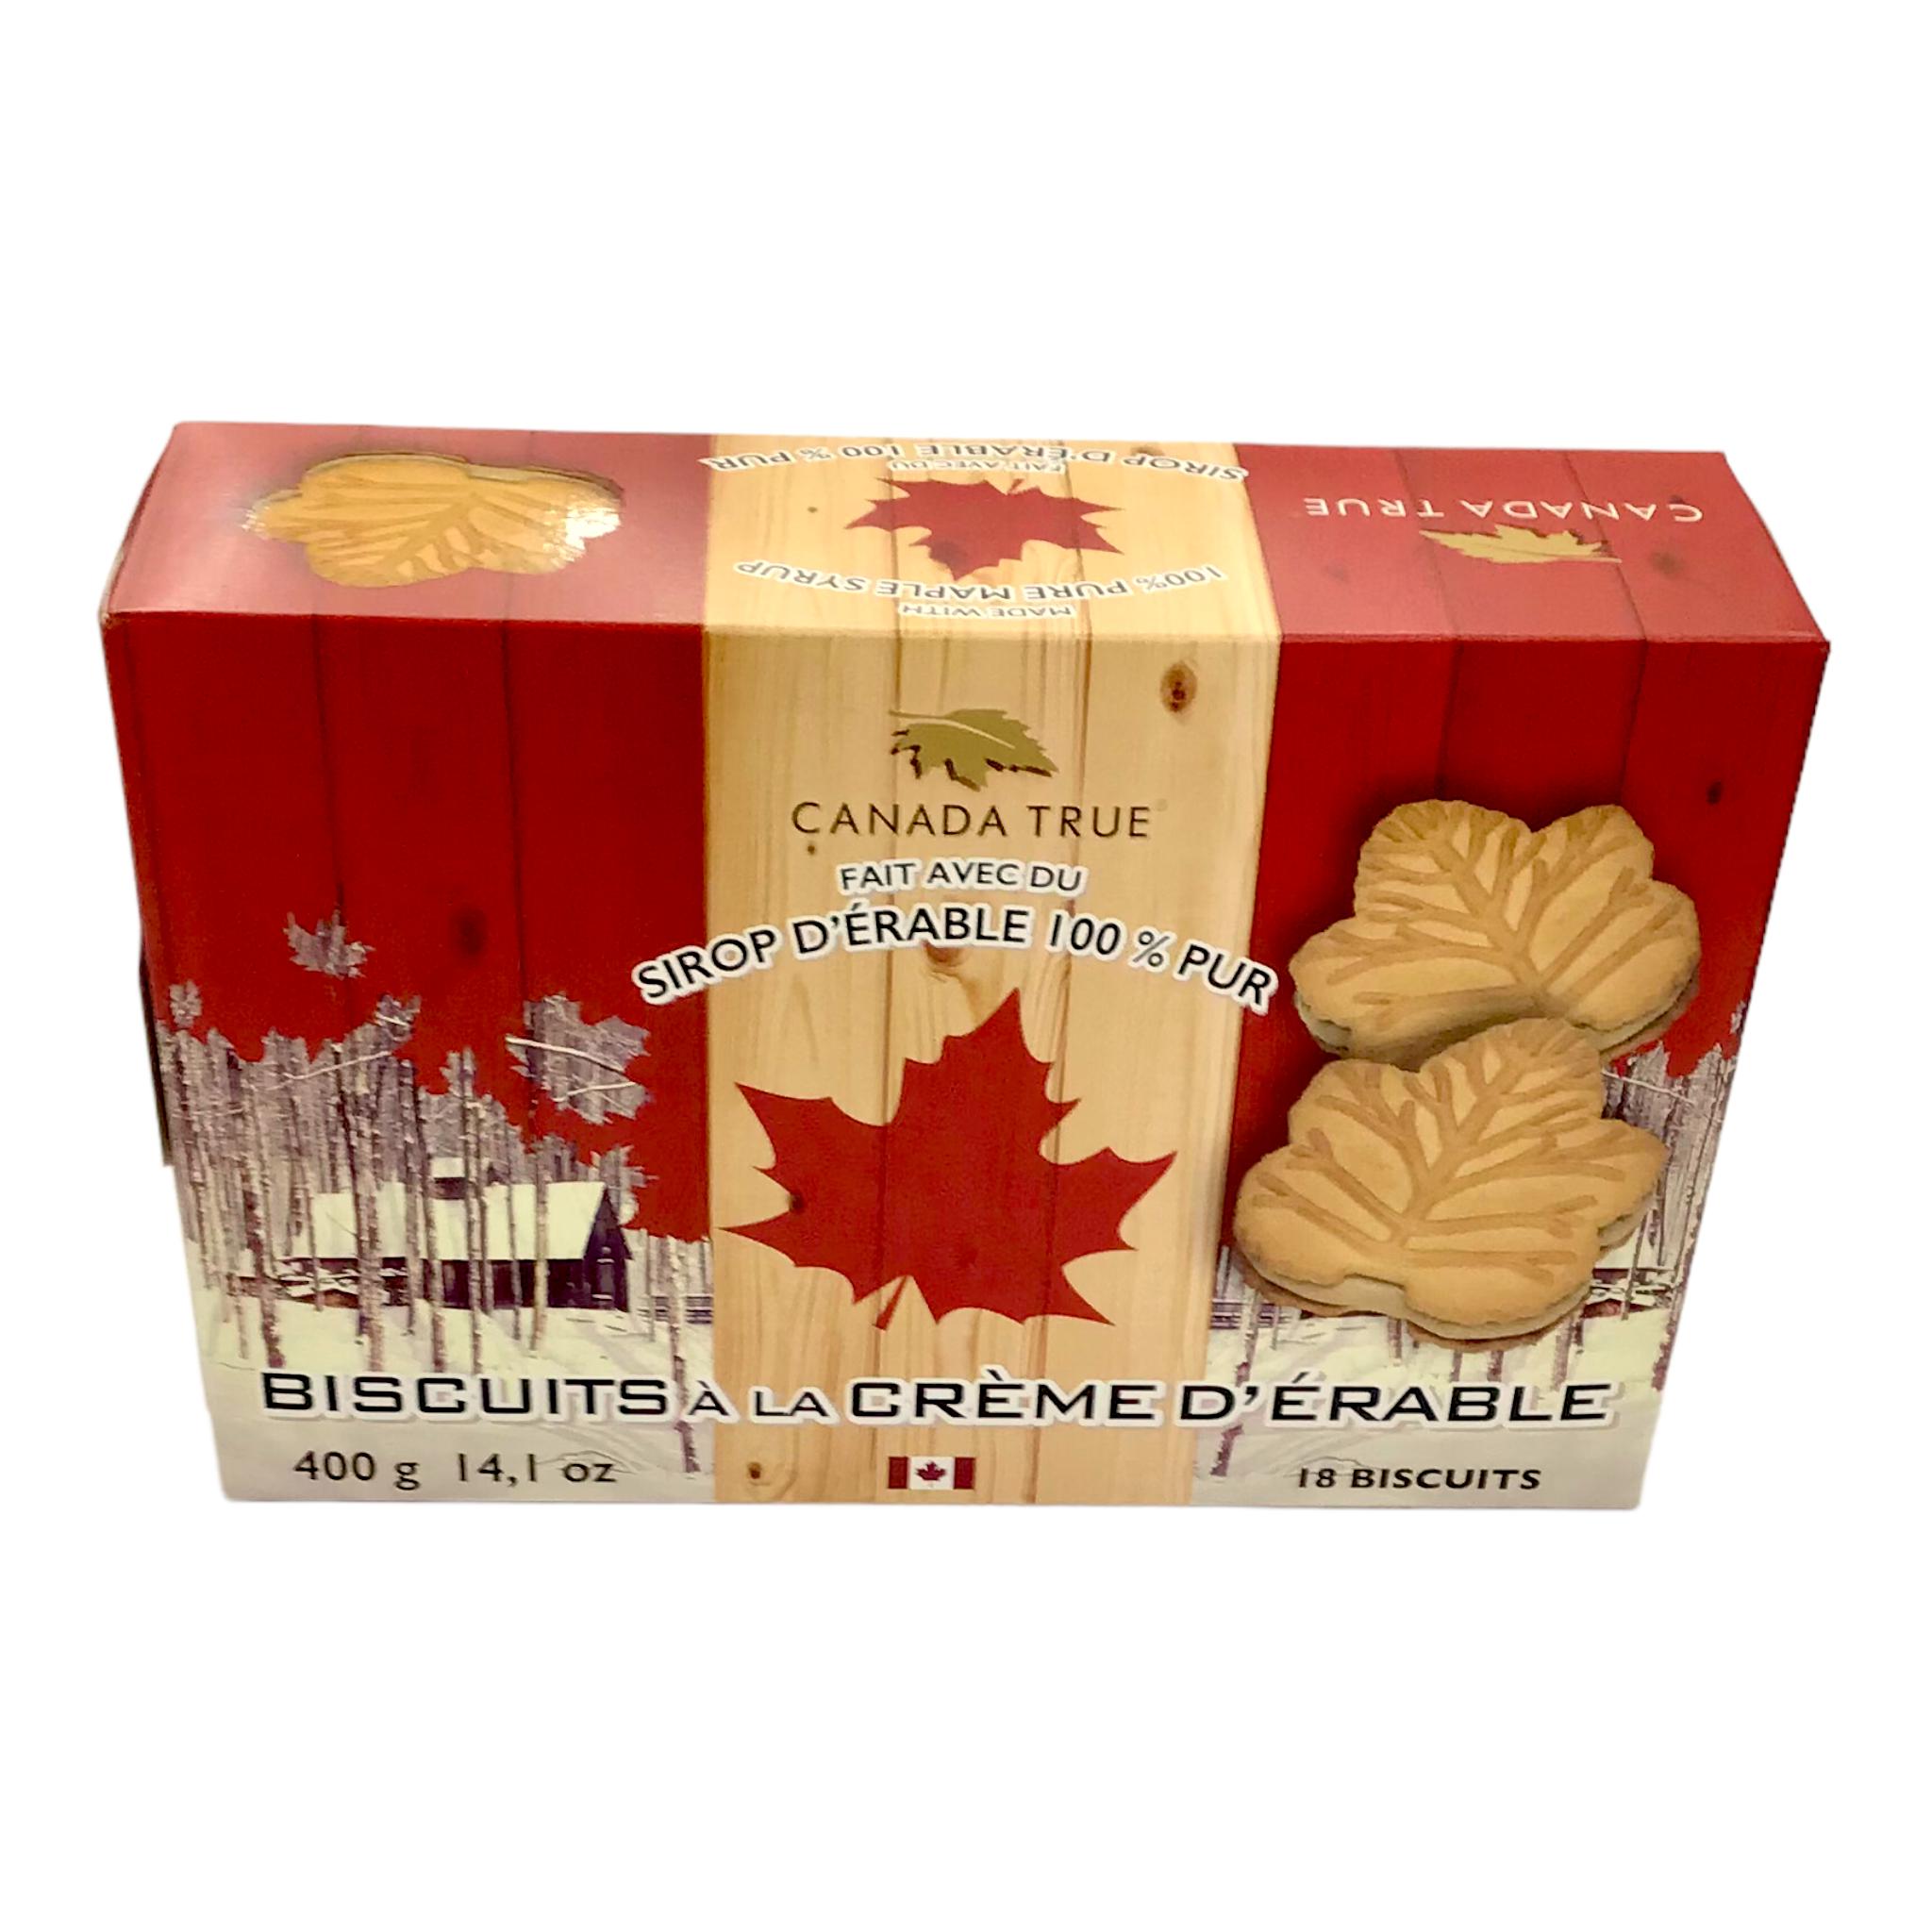 CANADA TRUE Maple Cream Cookies, 18 Cookies per Pack 100% Real Canadian Maple Syrup 400g